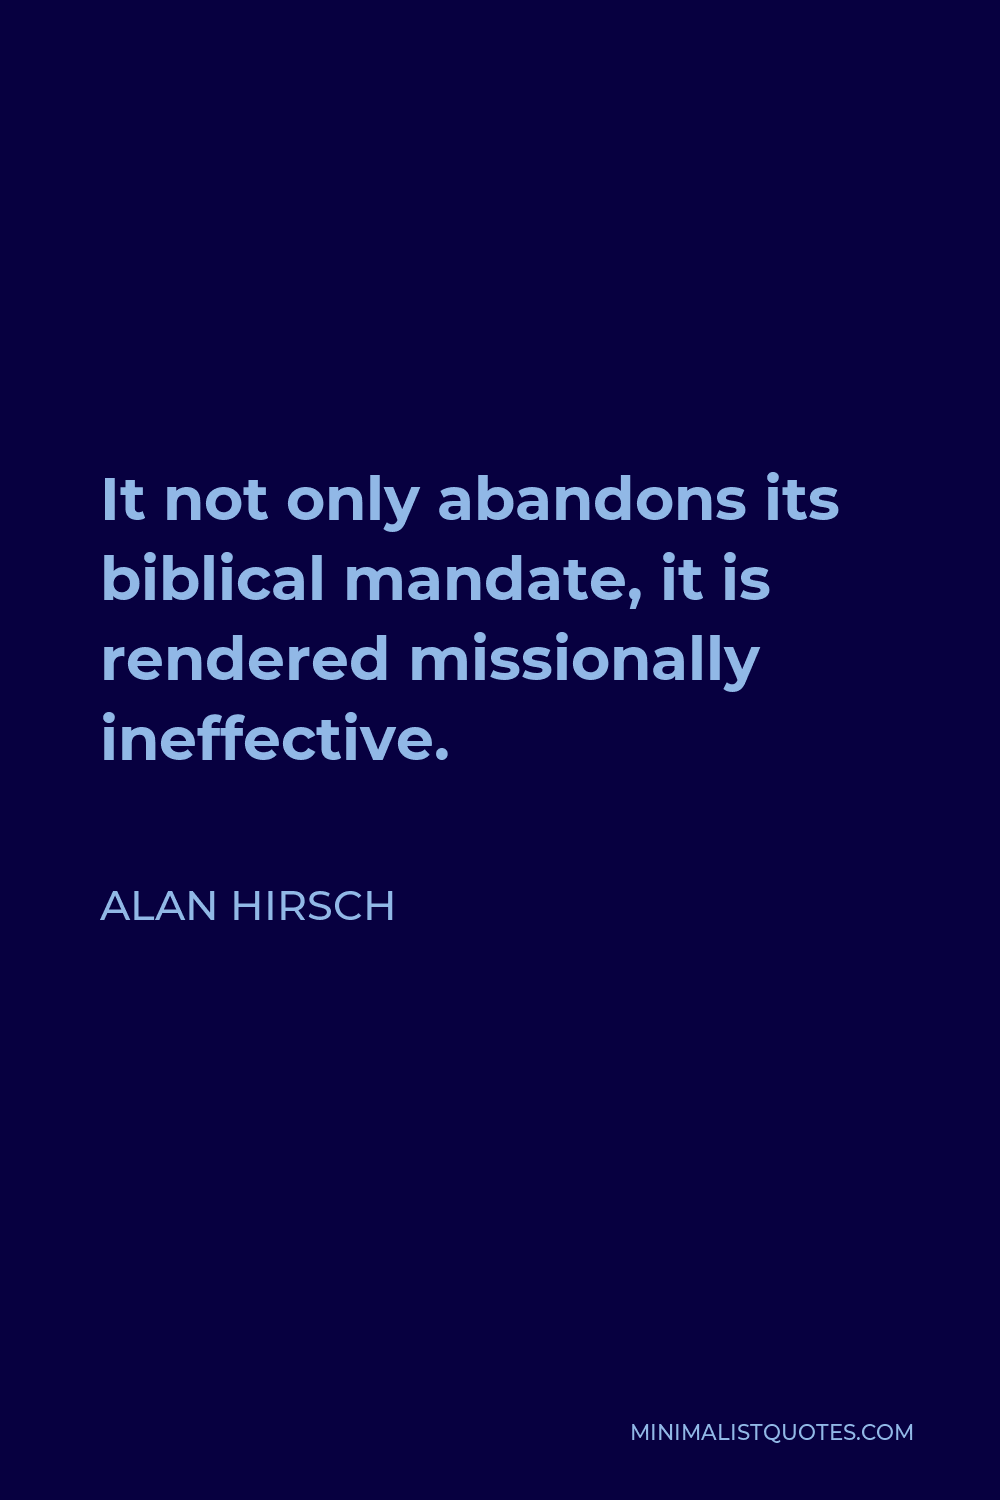 Alan Hirsch Quote - It not only abandons its biblical mandate, it is rendered missionally ineffective.